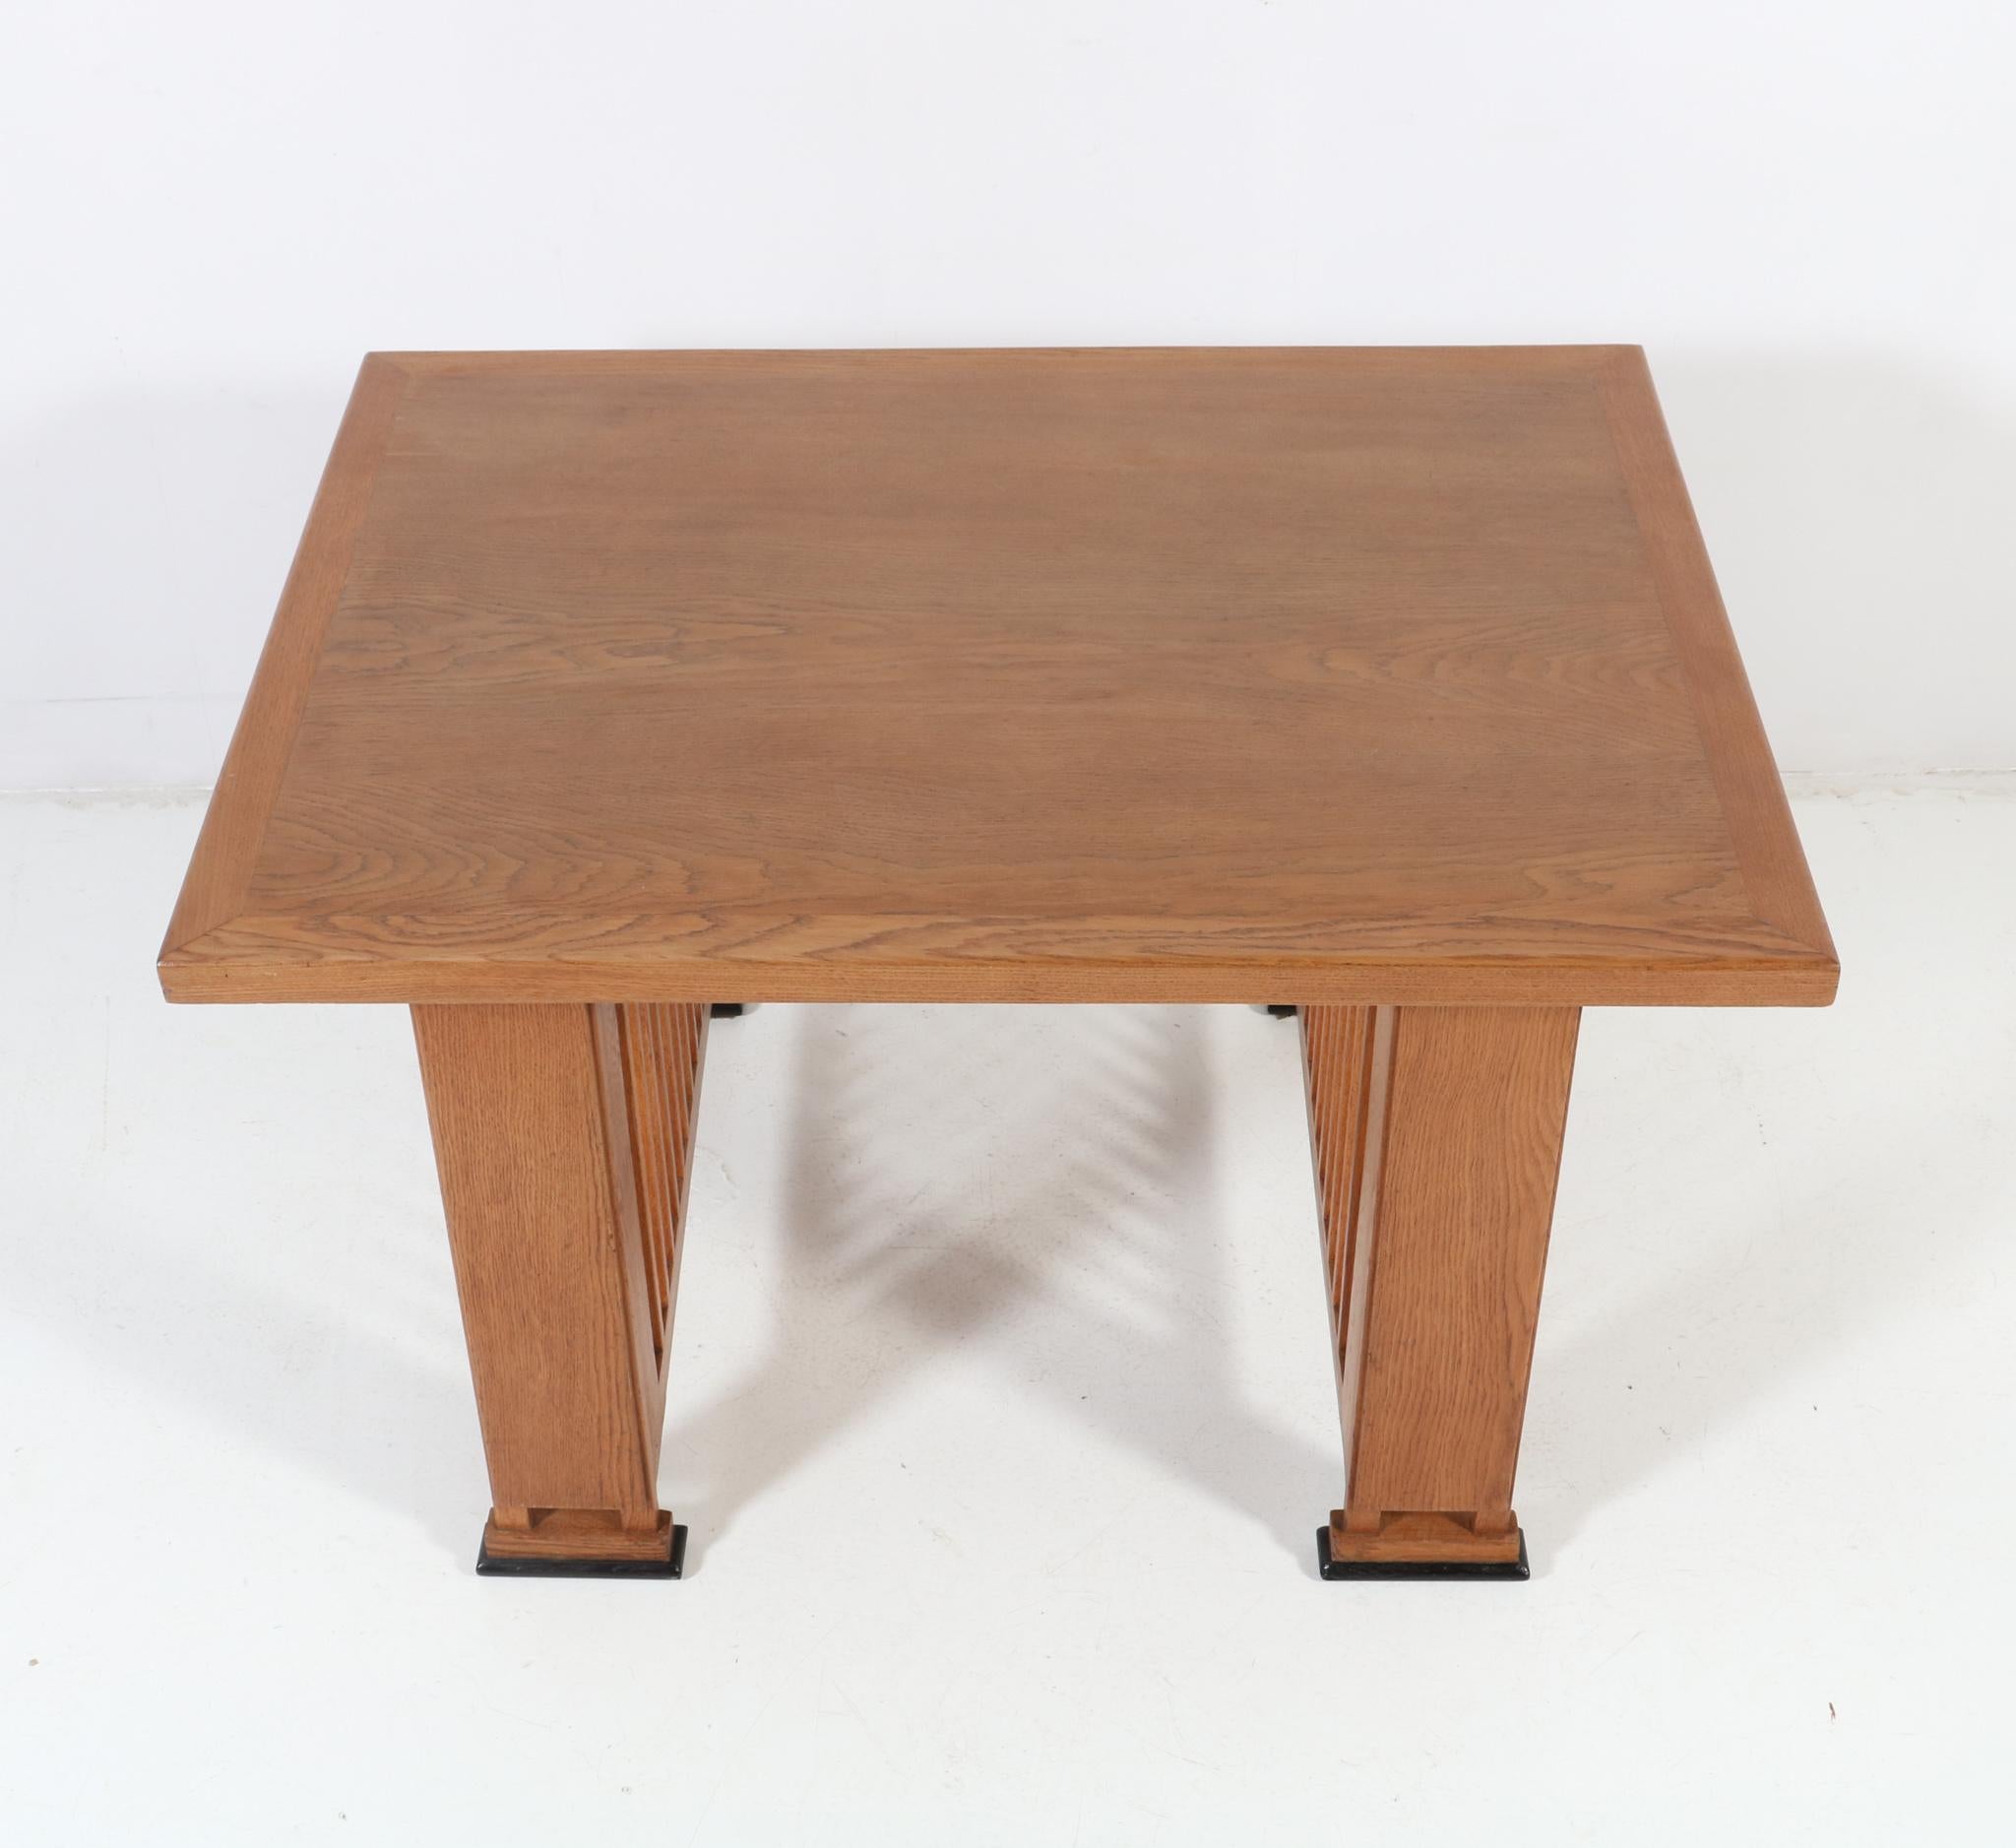 Oak Art Deco Modernist Writing Table or Dining Table by Architect Caspers, 1920s For Sale 2